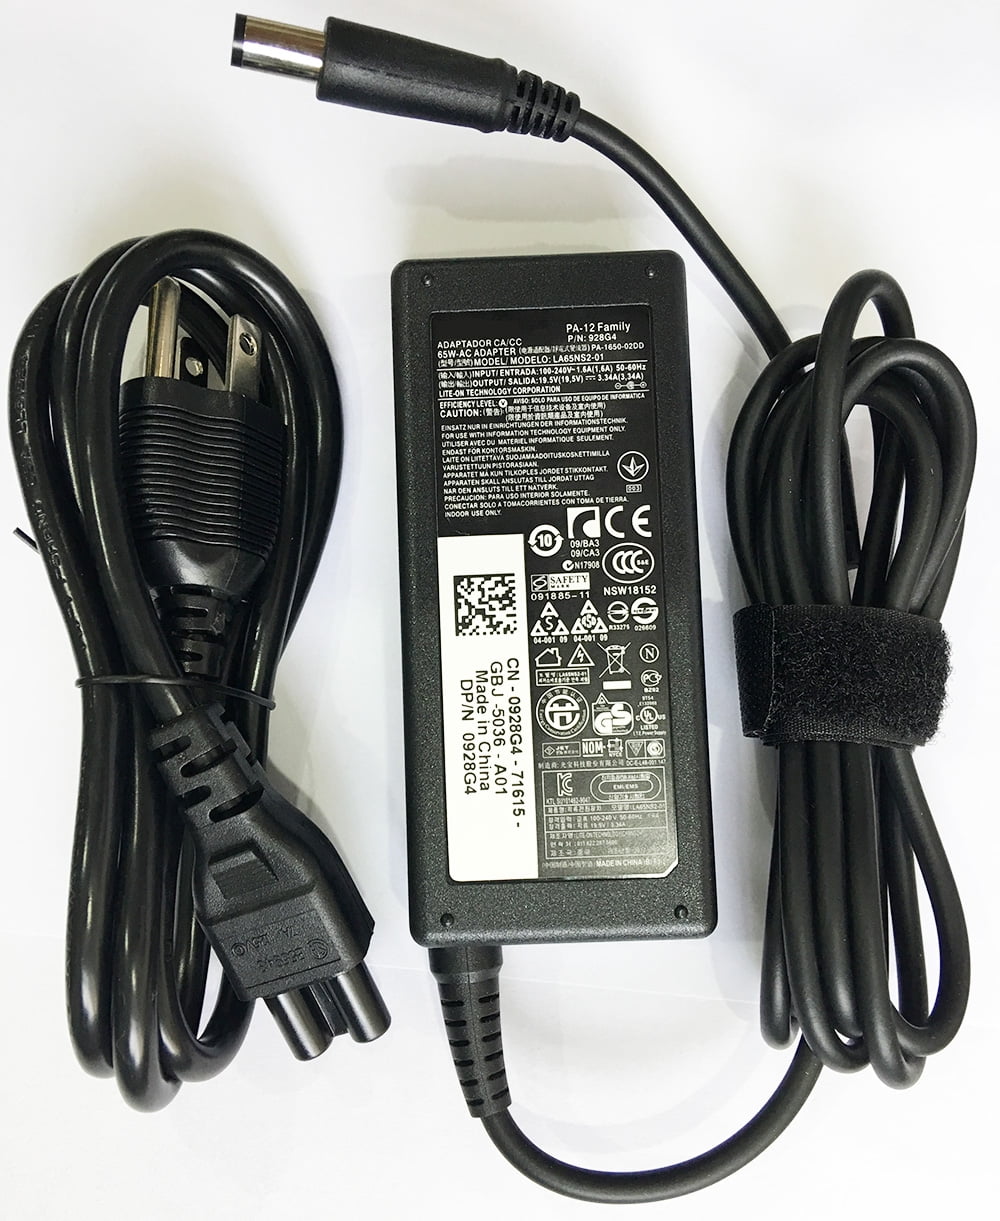 Lot of 10 OEM DELL HP-OQ065B83 PA-1650-05D AC Power Adapter Charger XPS Inspiron 